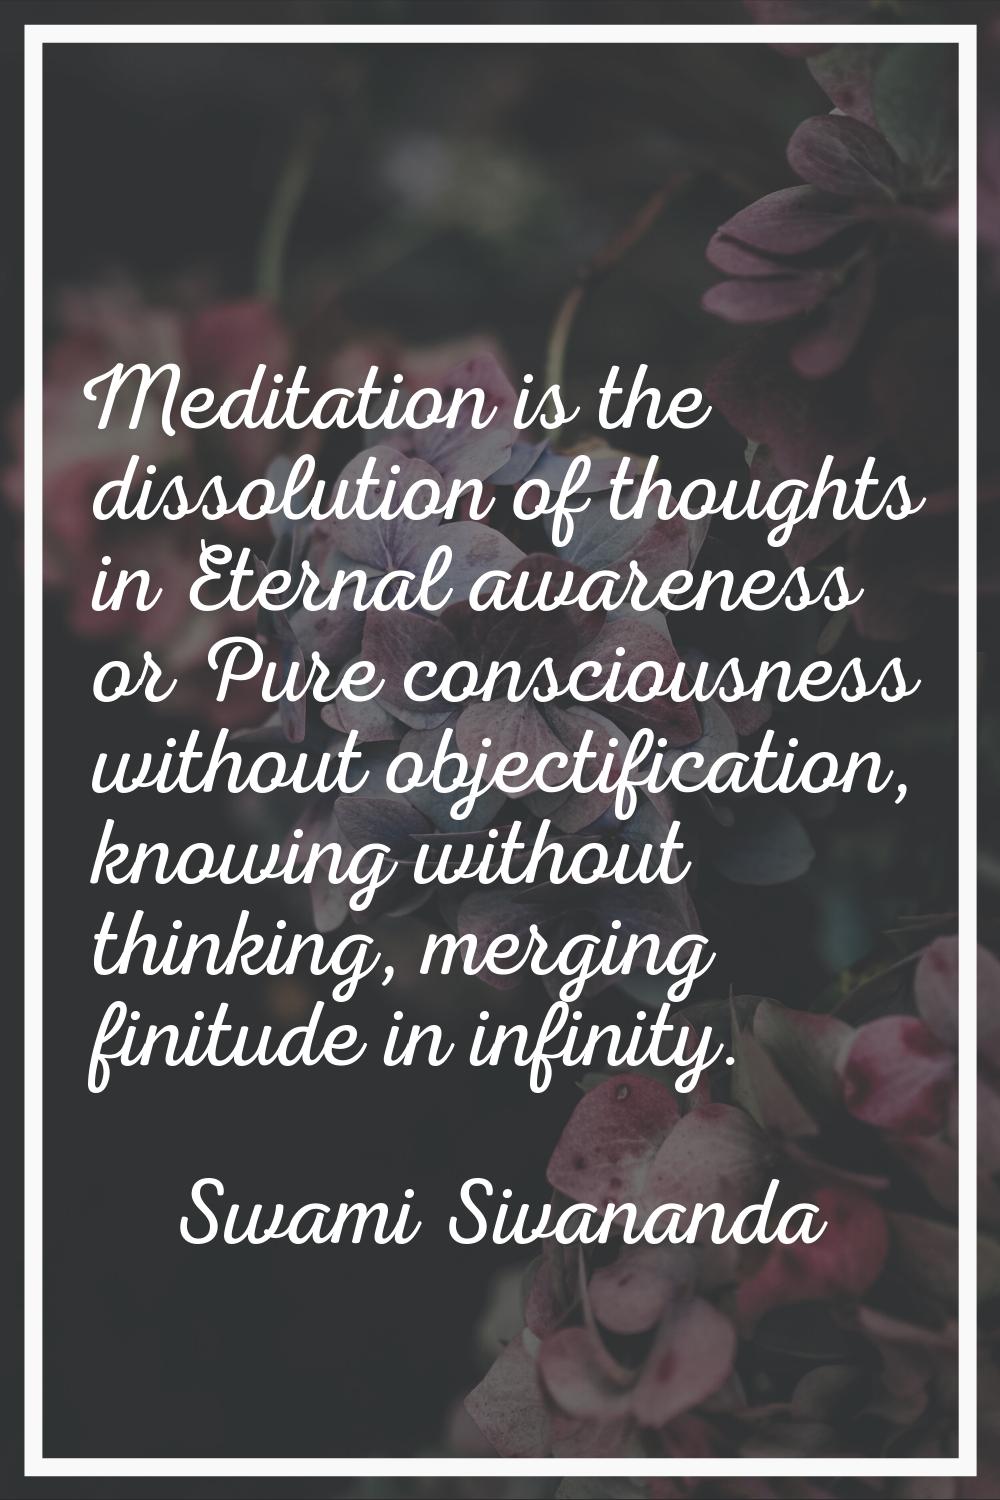 Meditation is the dissolution of thoughts in Eternal awareness or Pure consciousness without object